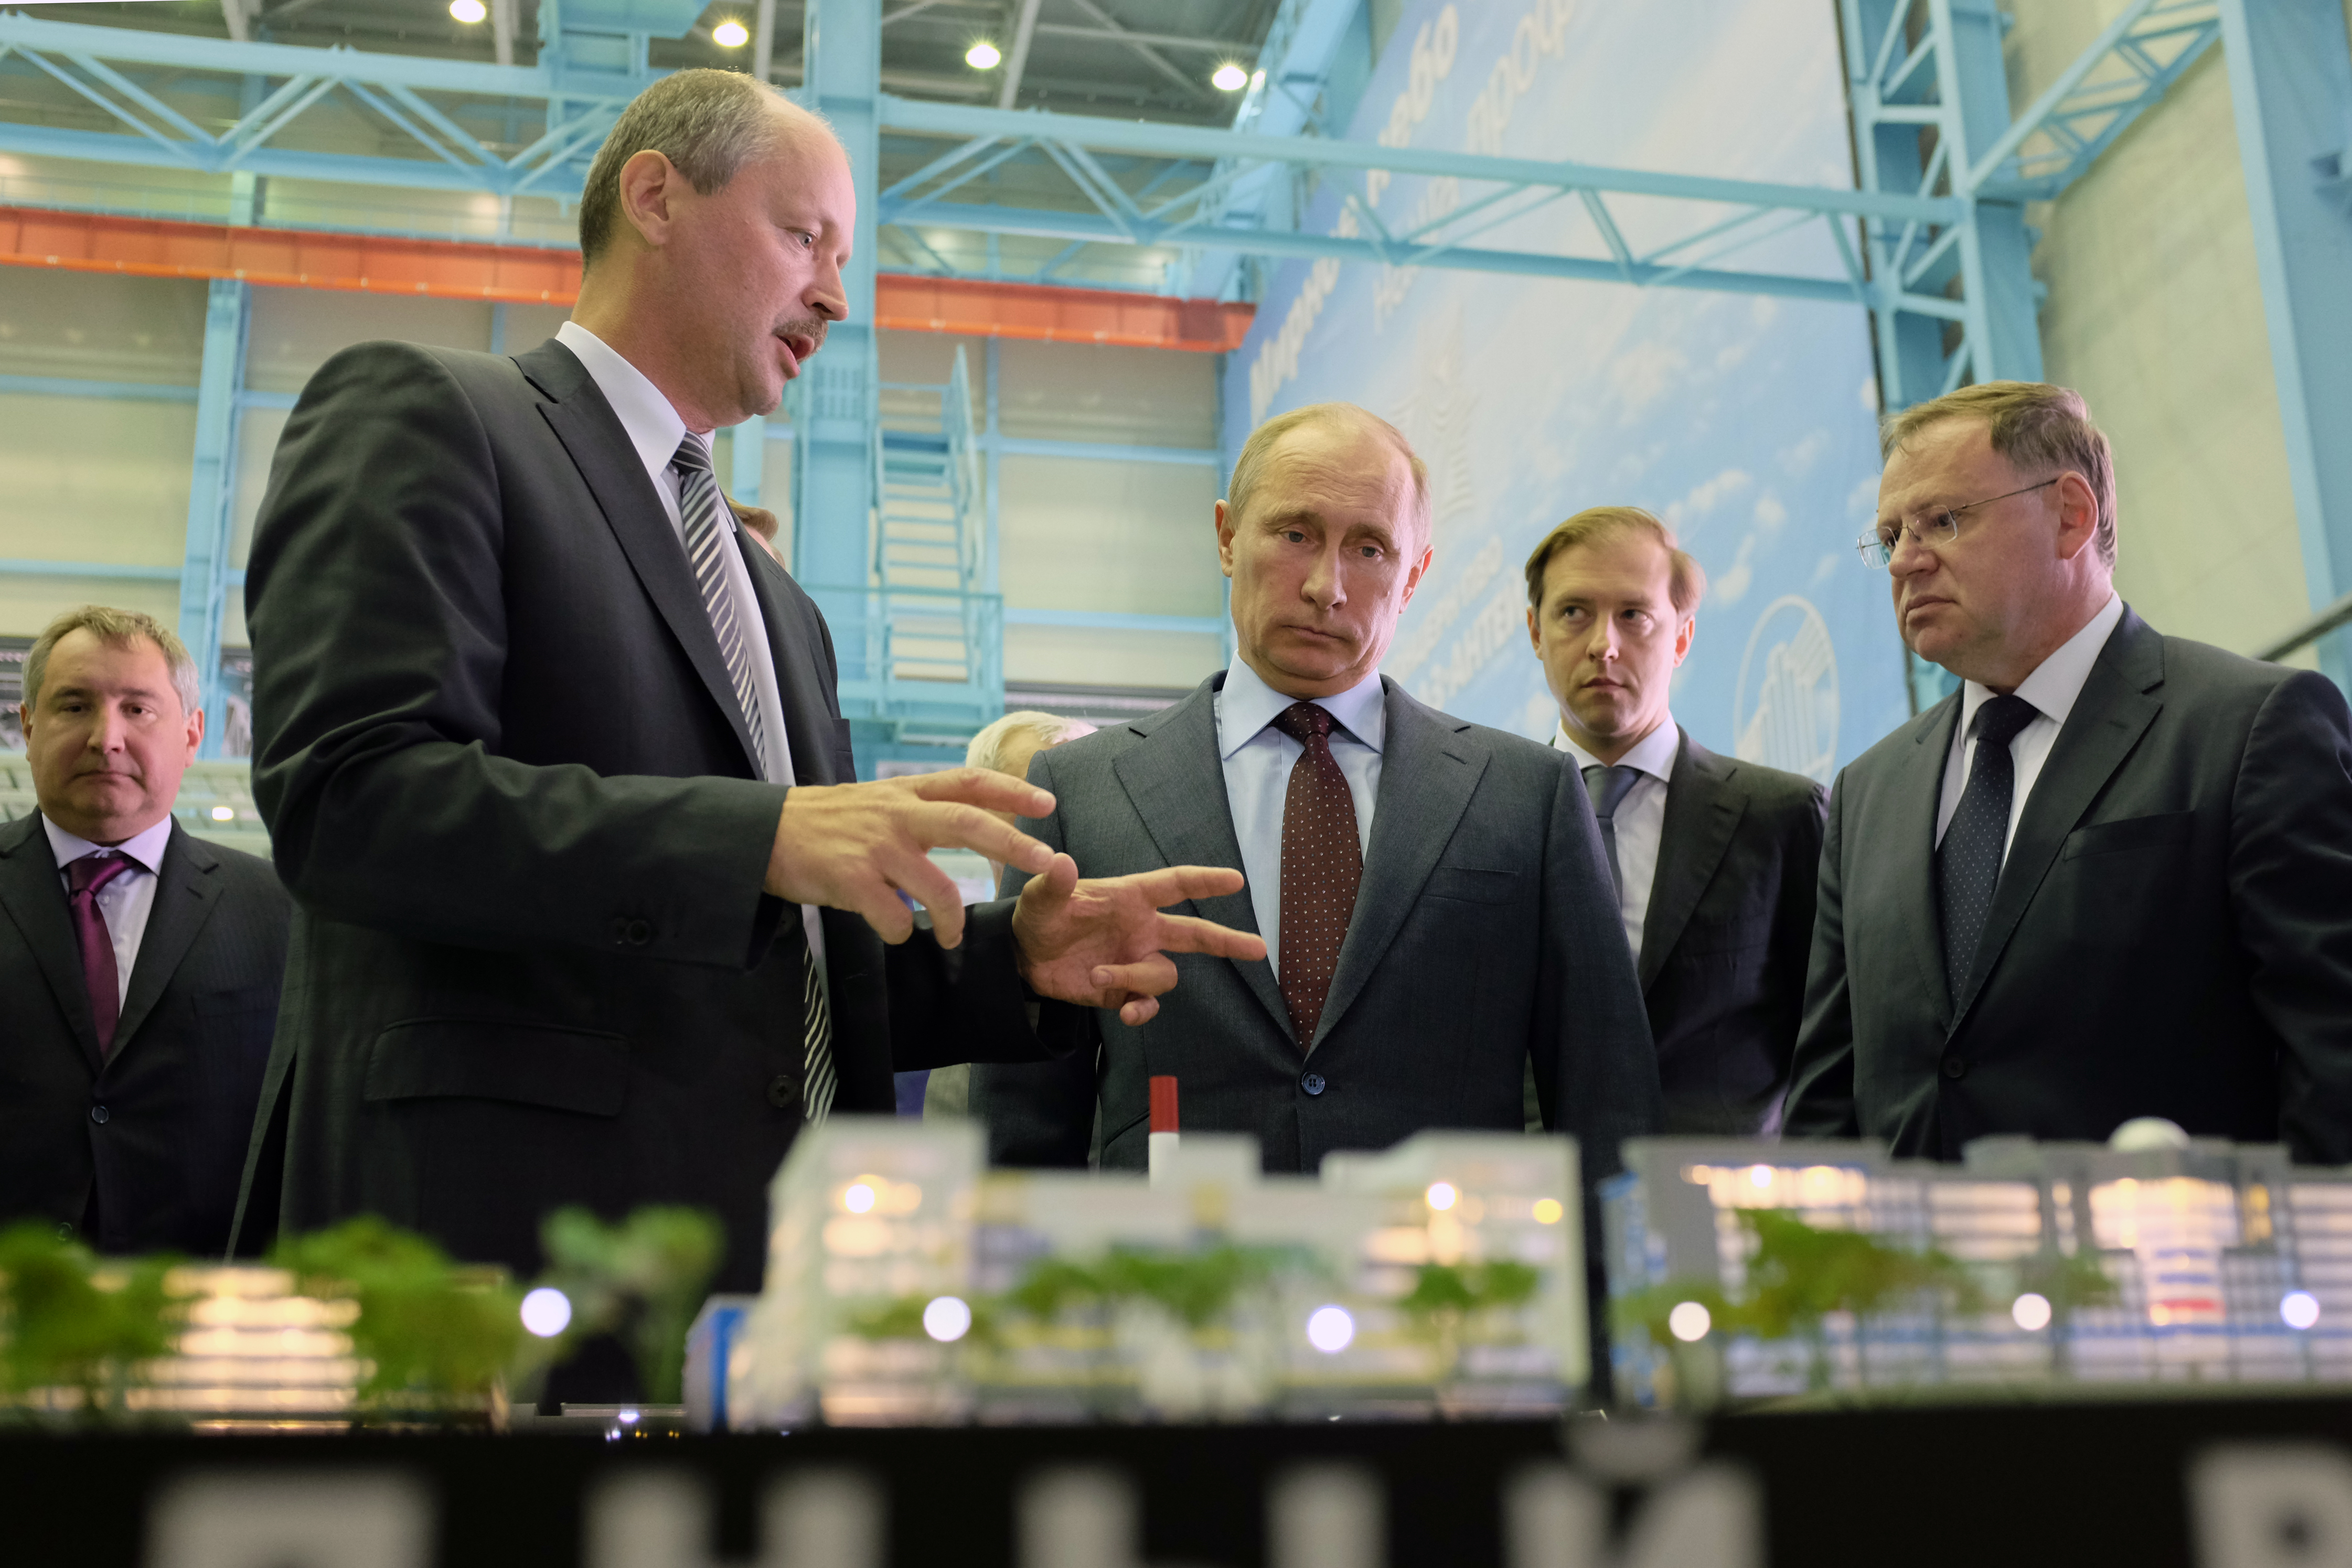 President Putin with two directors from the Almaz-Antey Corporation